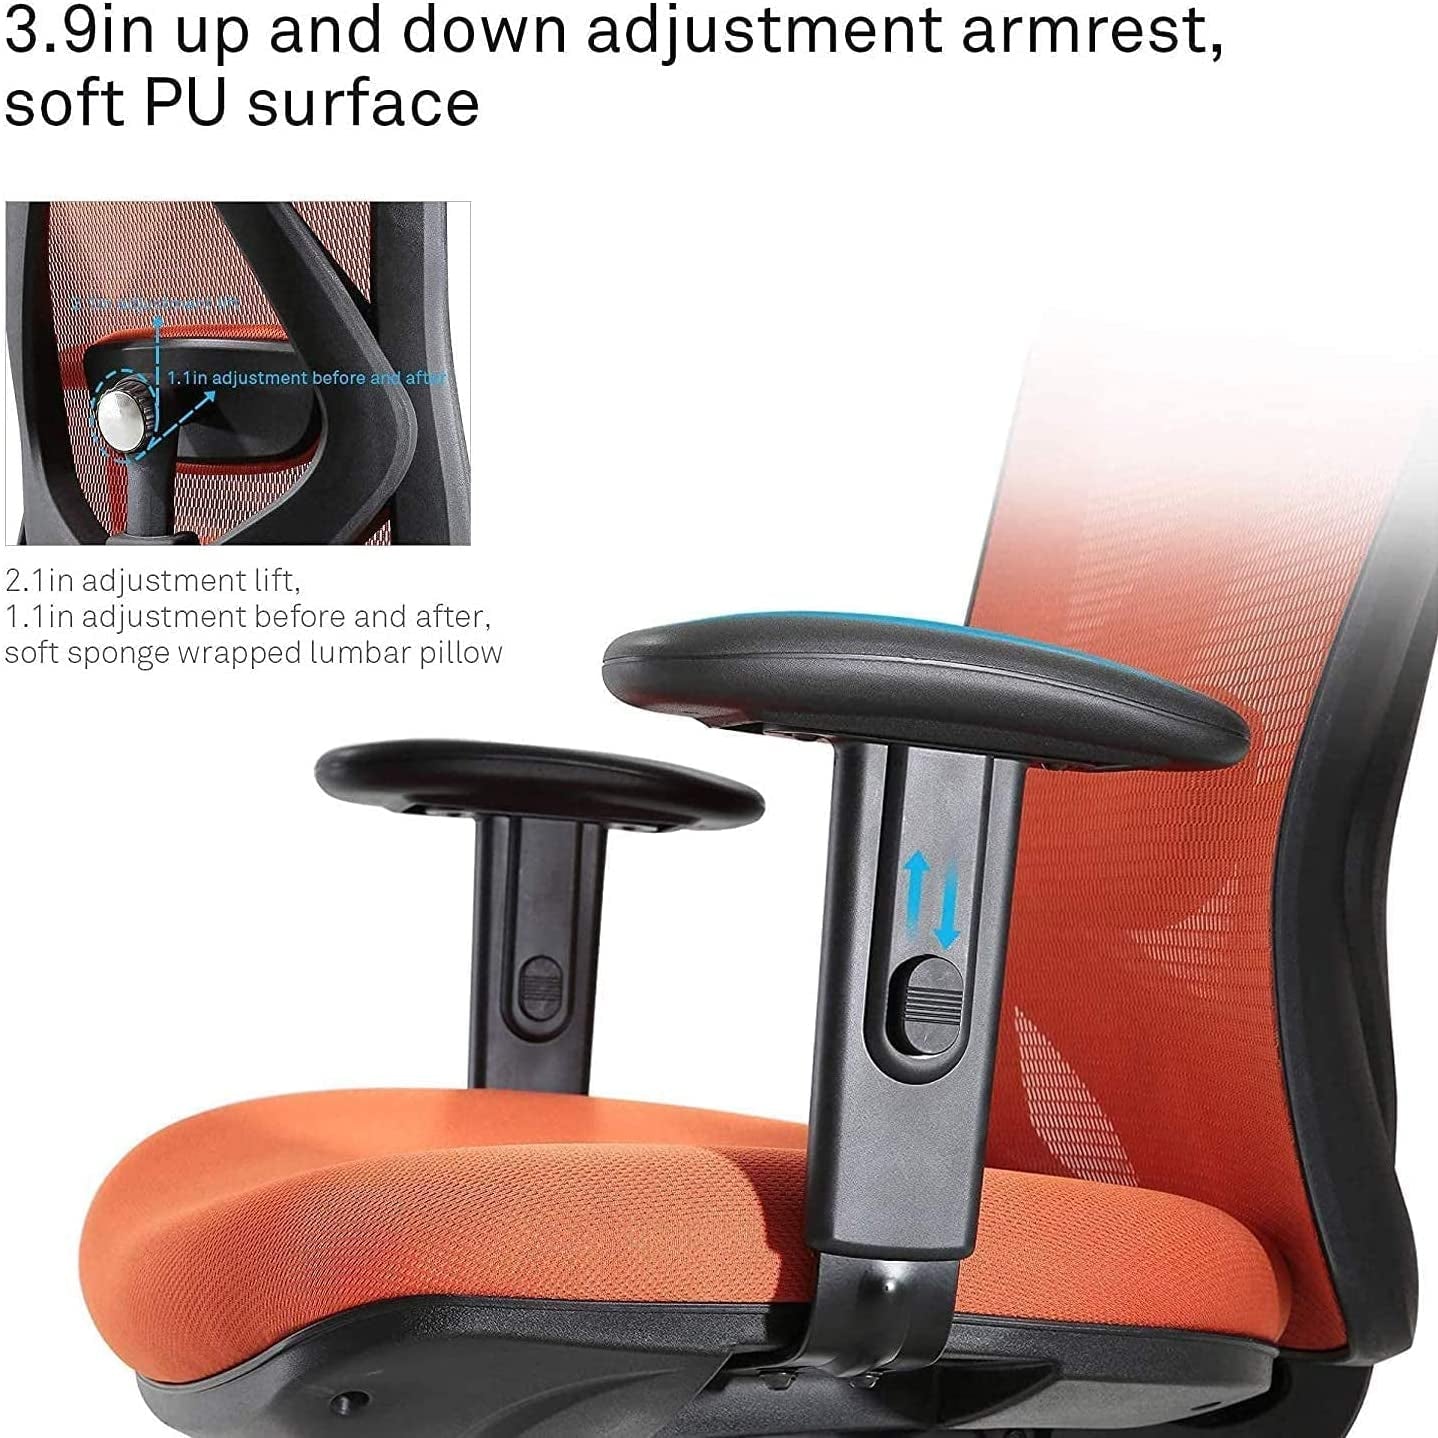 Office Chair Ergonomic Desk Chair, Breathable Mesh Design High Back Computer Chair, Adjustable Headrest and Lumbar Support (Orange)